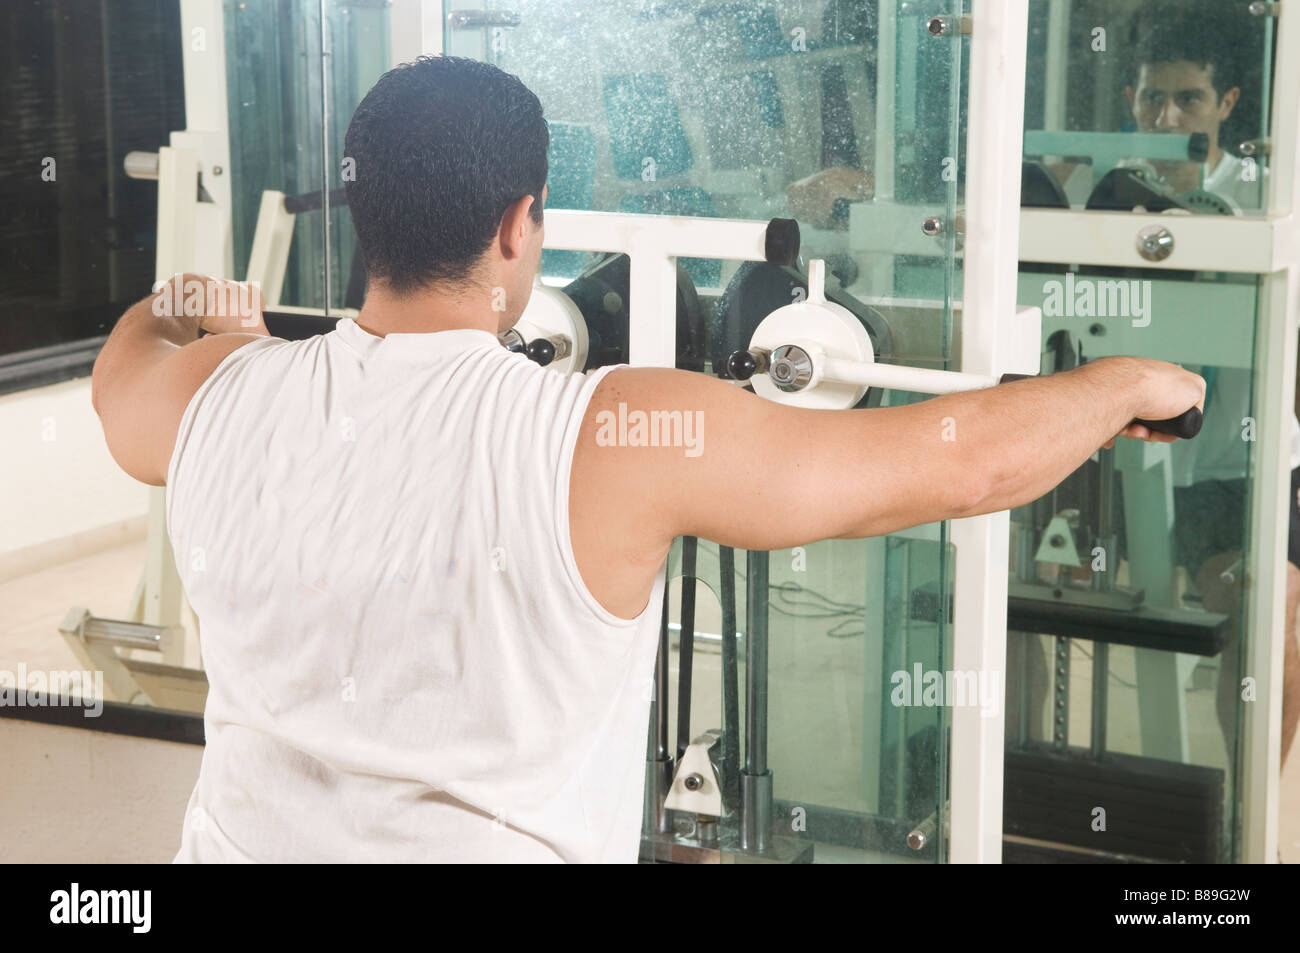 Man in the gym using front deltoid machine Stock Photo